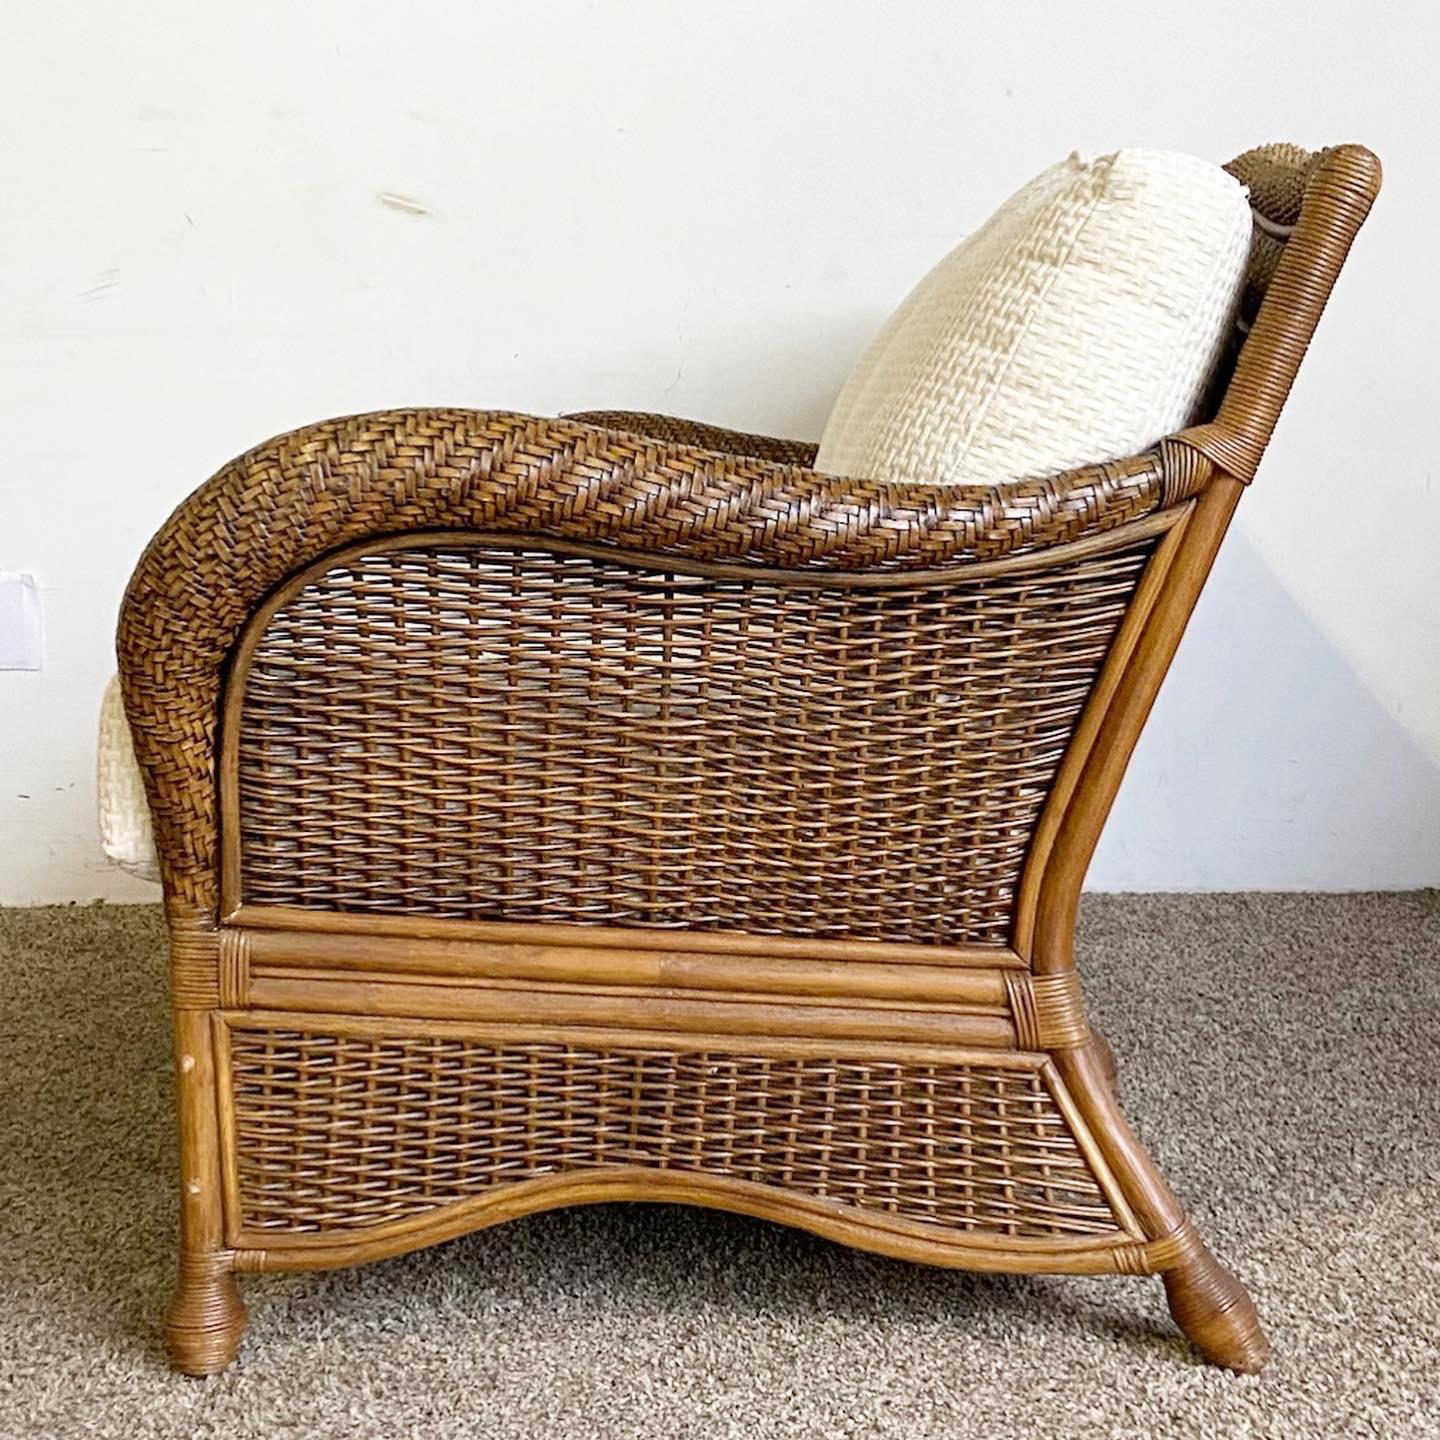 Late 20th Century Boho Chic Bamboo Rattan Wicker Love Seat With Cushions For Sale